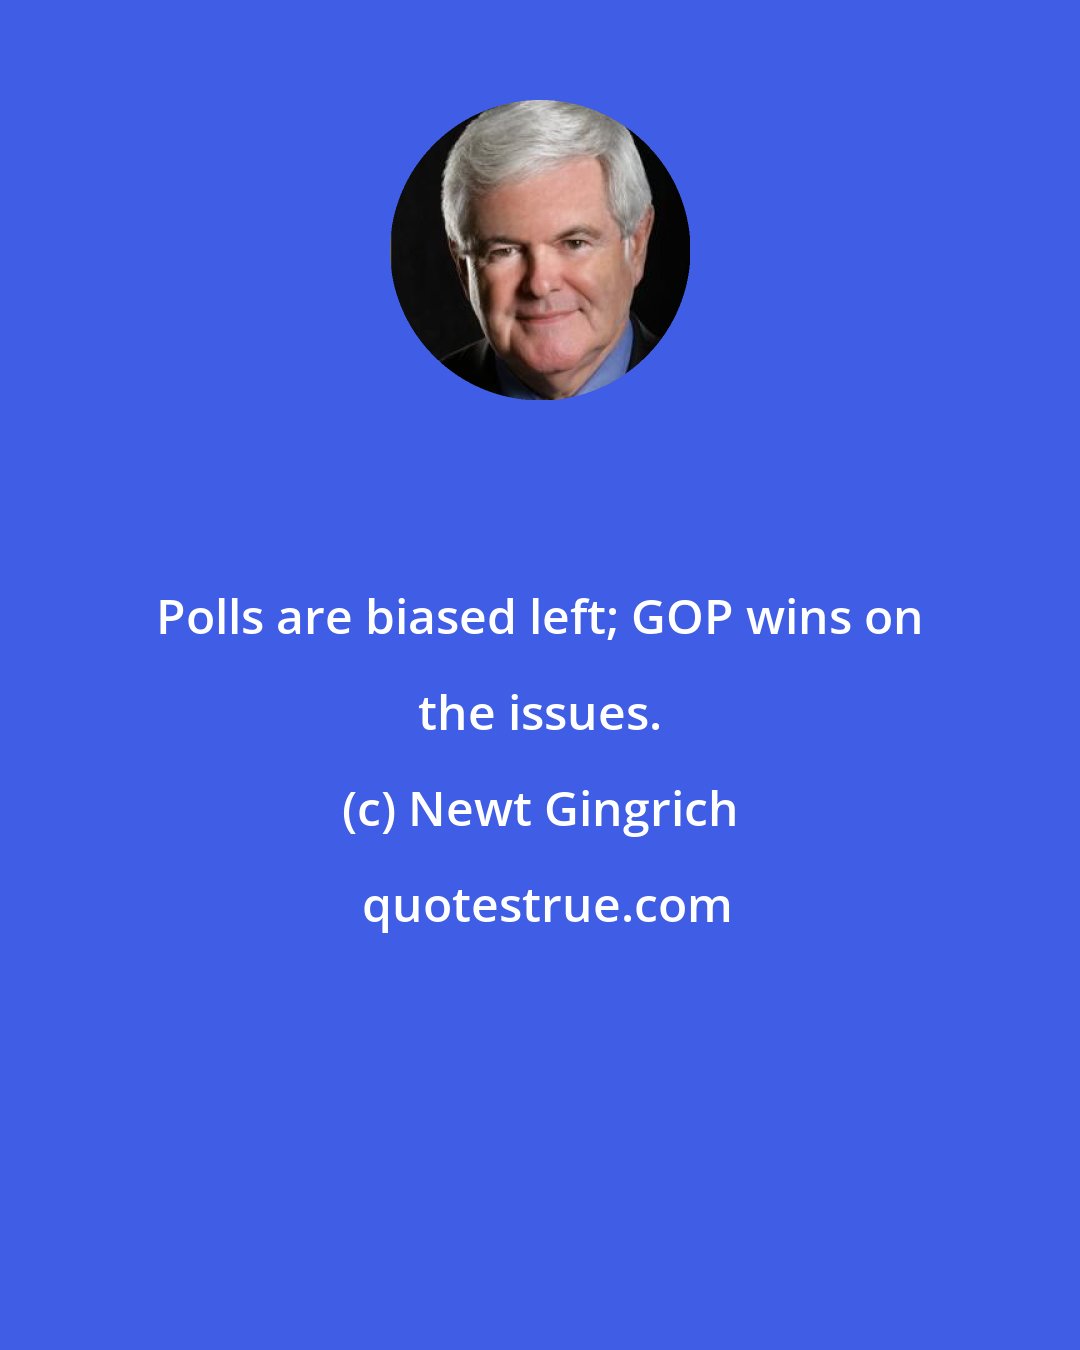 Newt Gingrich: Polls are biased left; GOP wins on the issues.